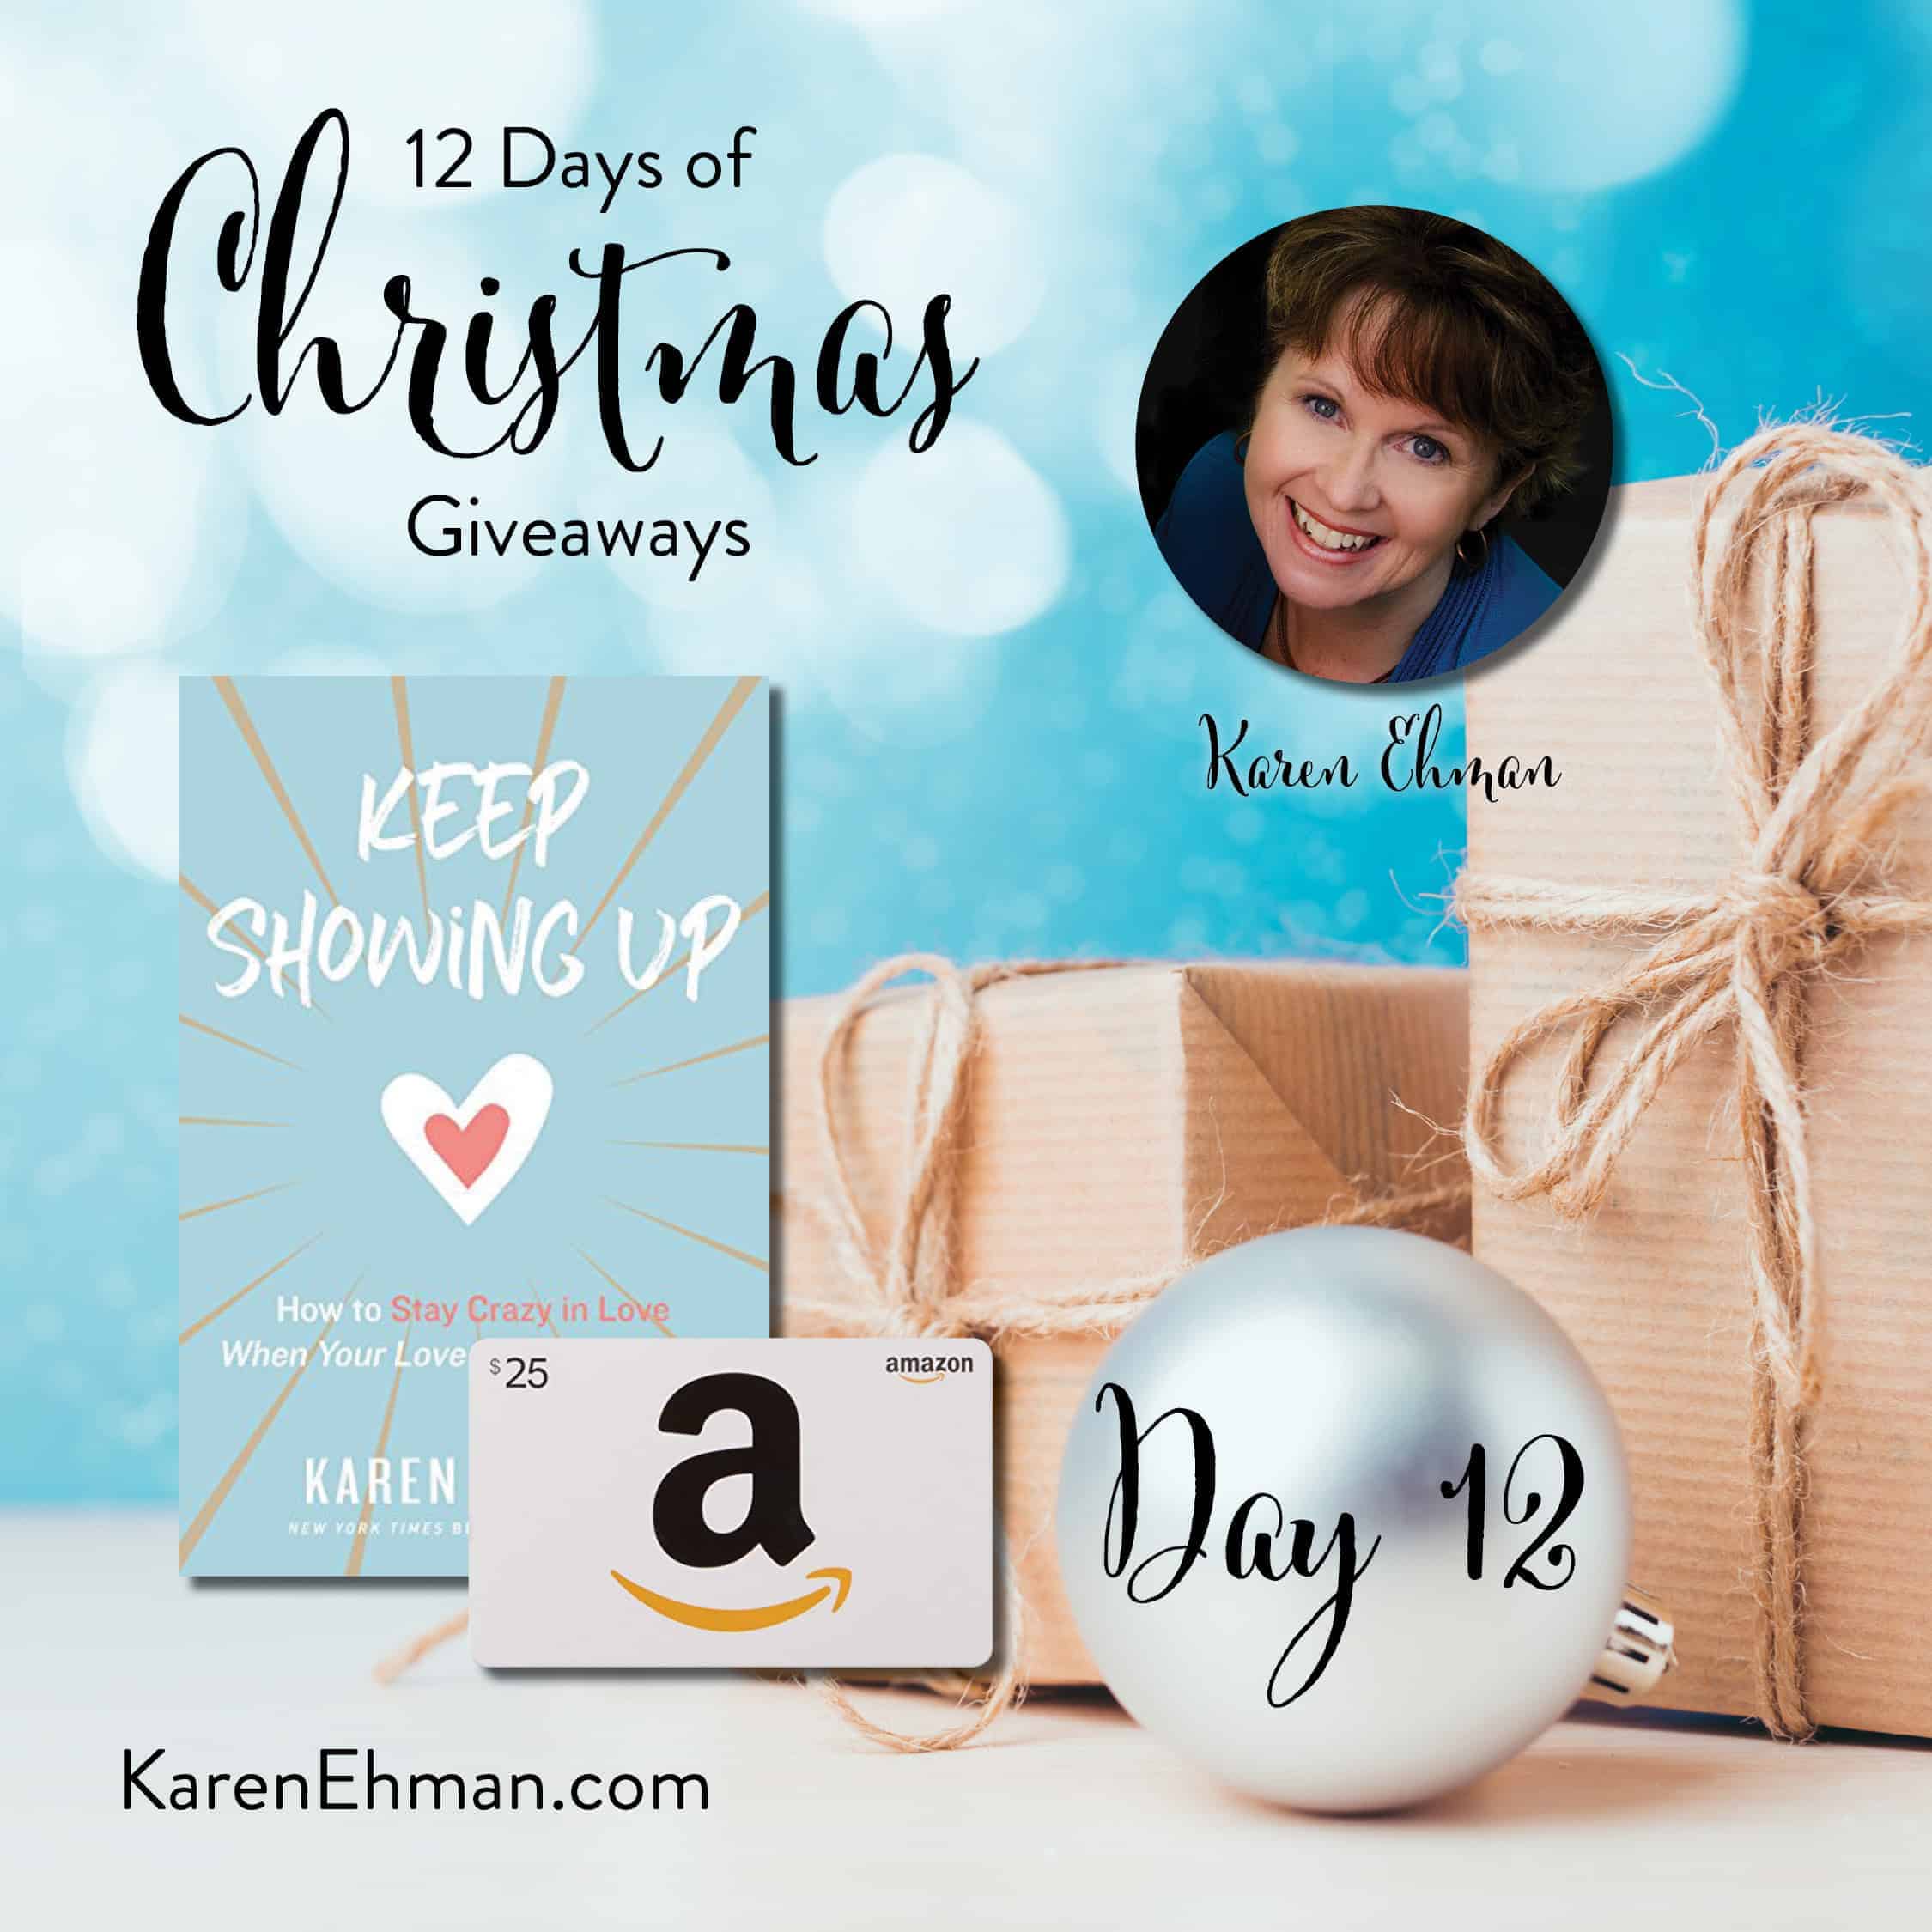 Day 12 of 12 Days of Christmas Giveaways (with Karen Ehman)